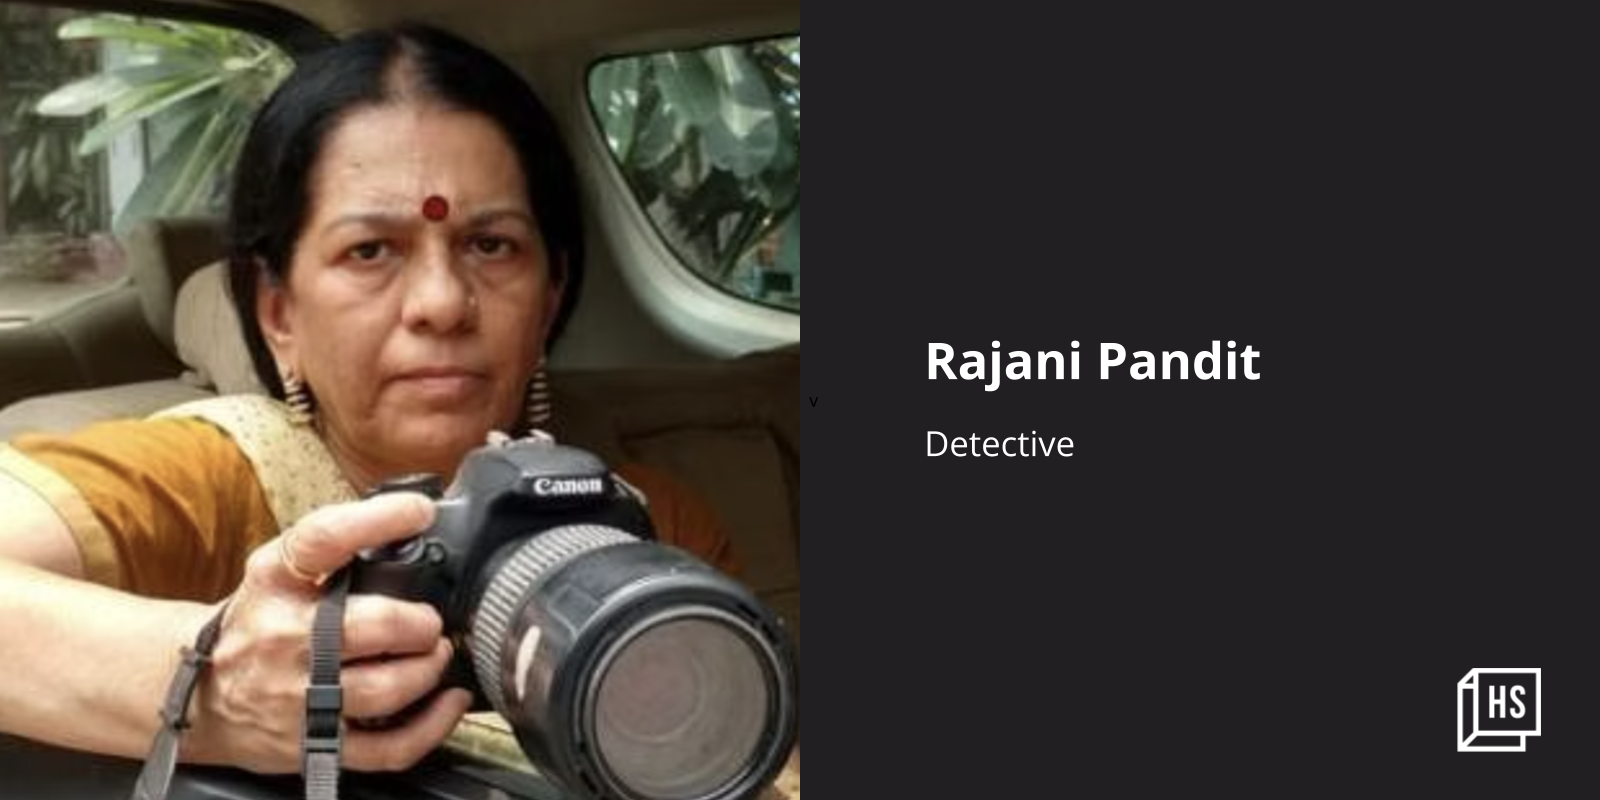 Meet Rajani Pandit, India’s first female detective with more than 80,000 cases to her credit

